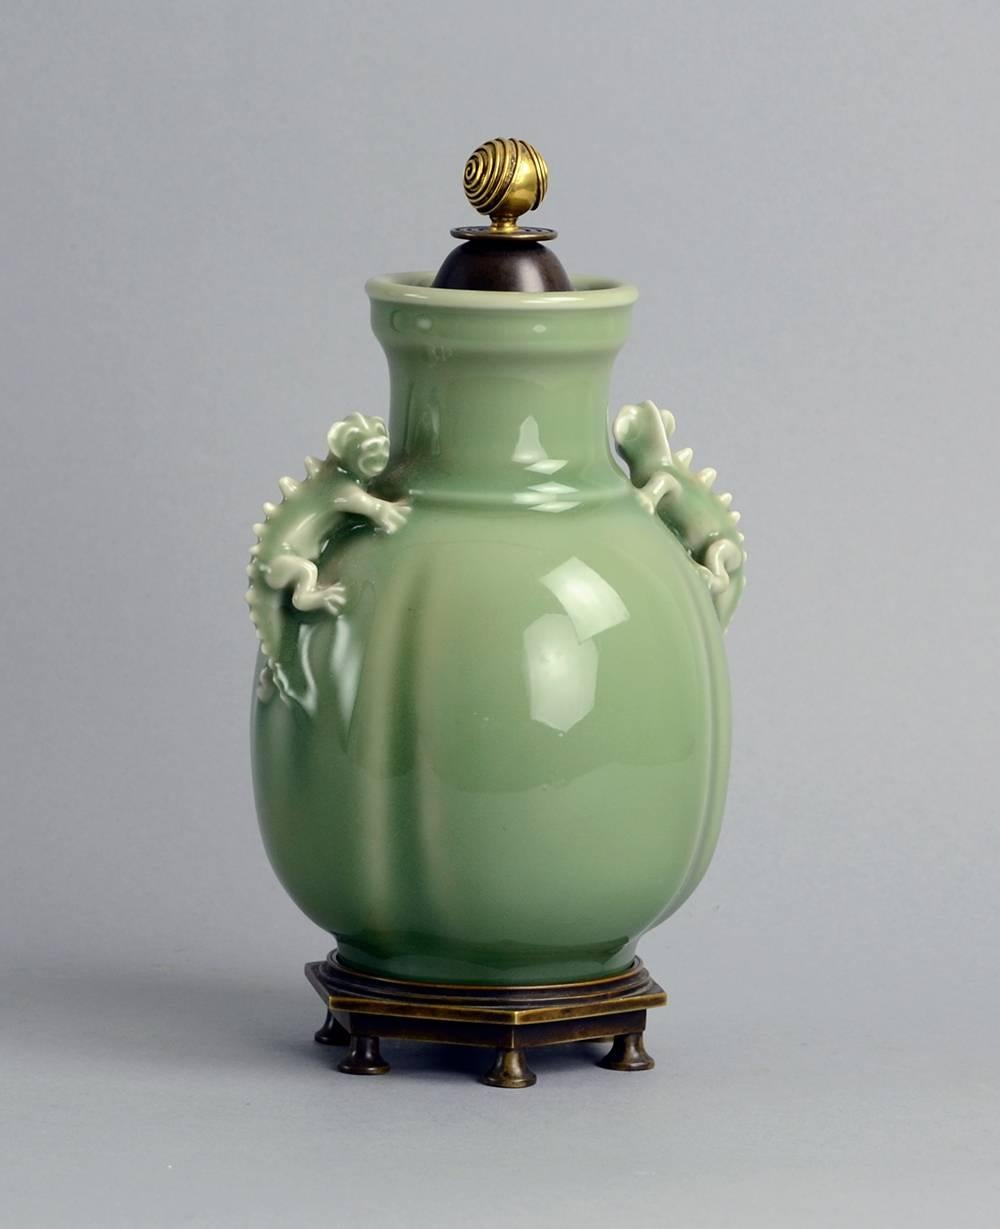 Bode Willumsen for Royal Copenhagen, Denmark.
Unique stoneware lidded jar with applied dragon handles and glossy celadon glaze. Lid by Knud Andersen, 1930s.
Measures: Height 10